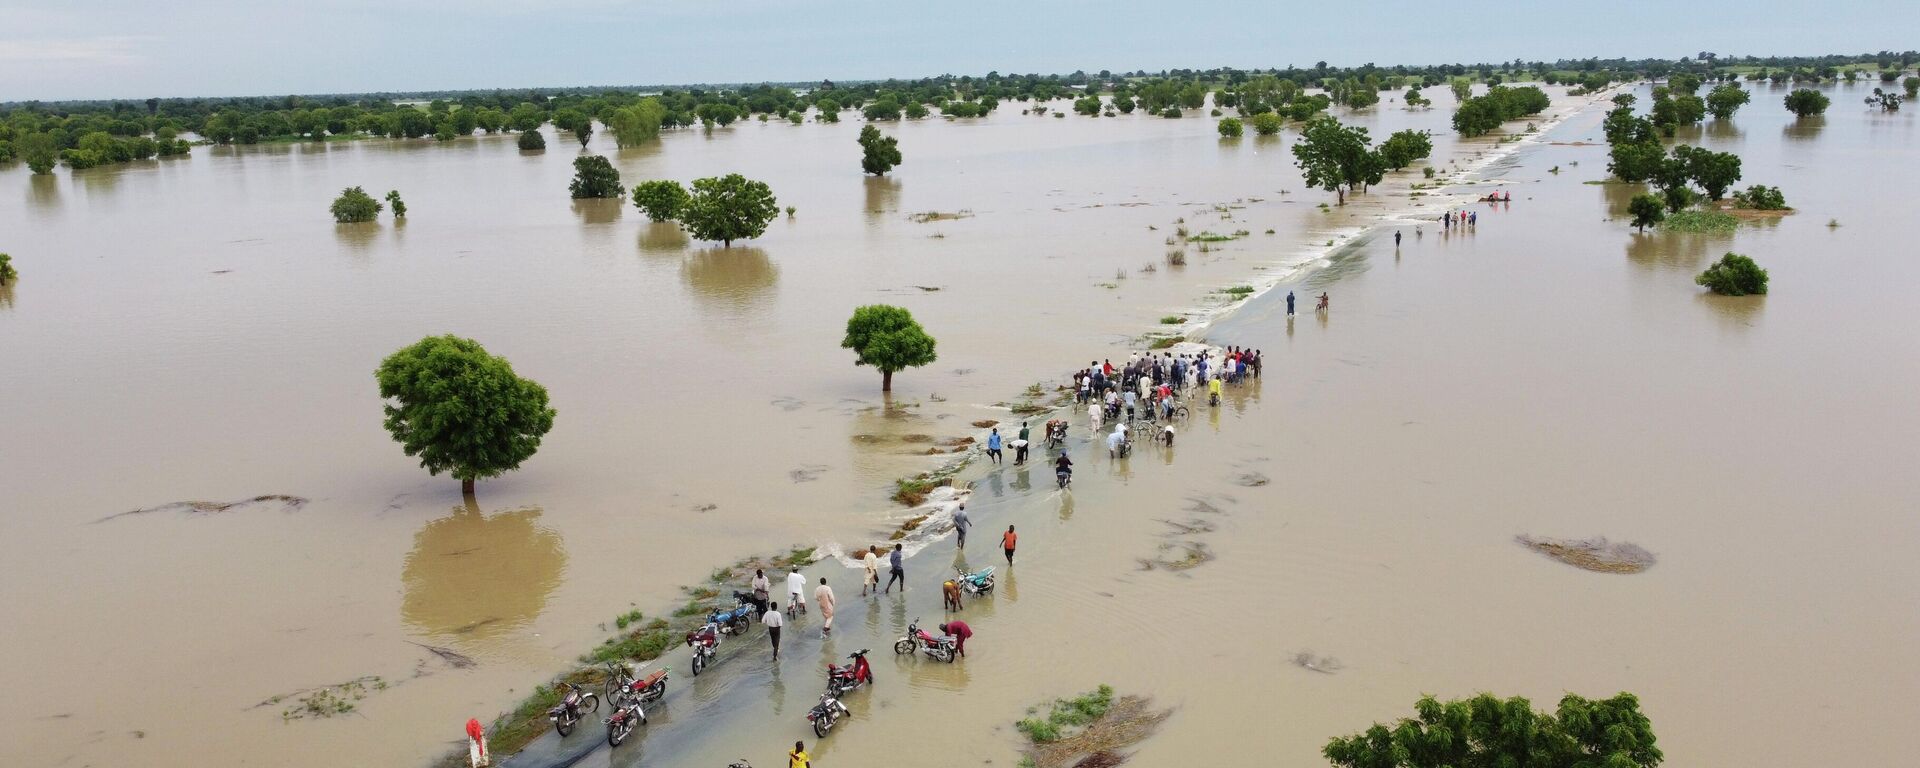 People walk through floodwaters after heavy rainfall in Hadeja, Nigeria, Monday, Sept 19, 2022. Nigeria is battling its worst floods in a decade with more than 300 people killed in 2021 including at least 20 this week, authorities told the Associated Press on Monday. - Sputnik International, 1920, 20.09.2022